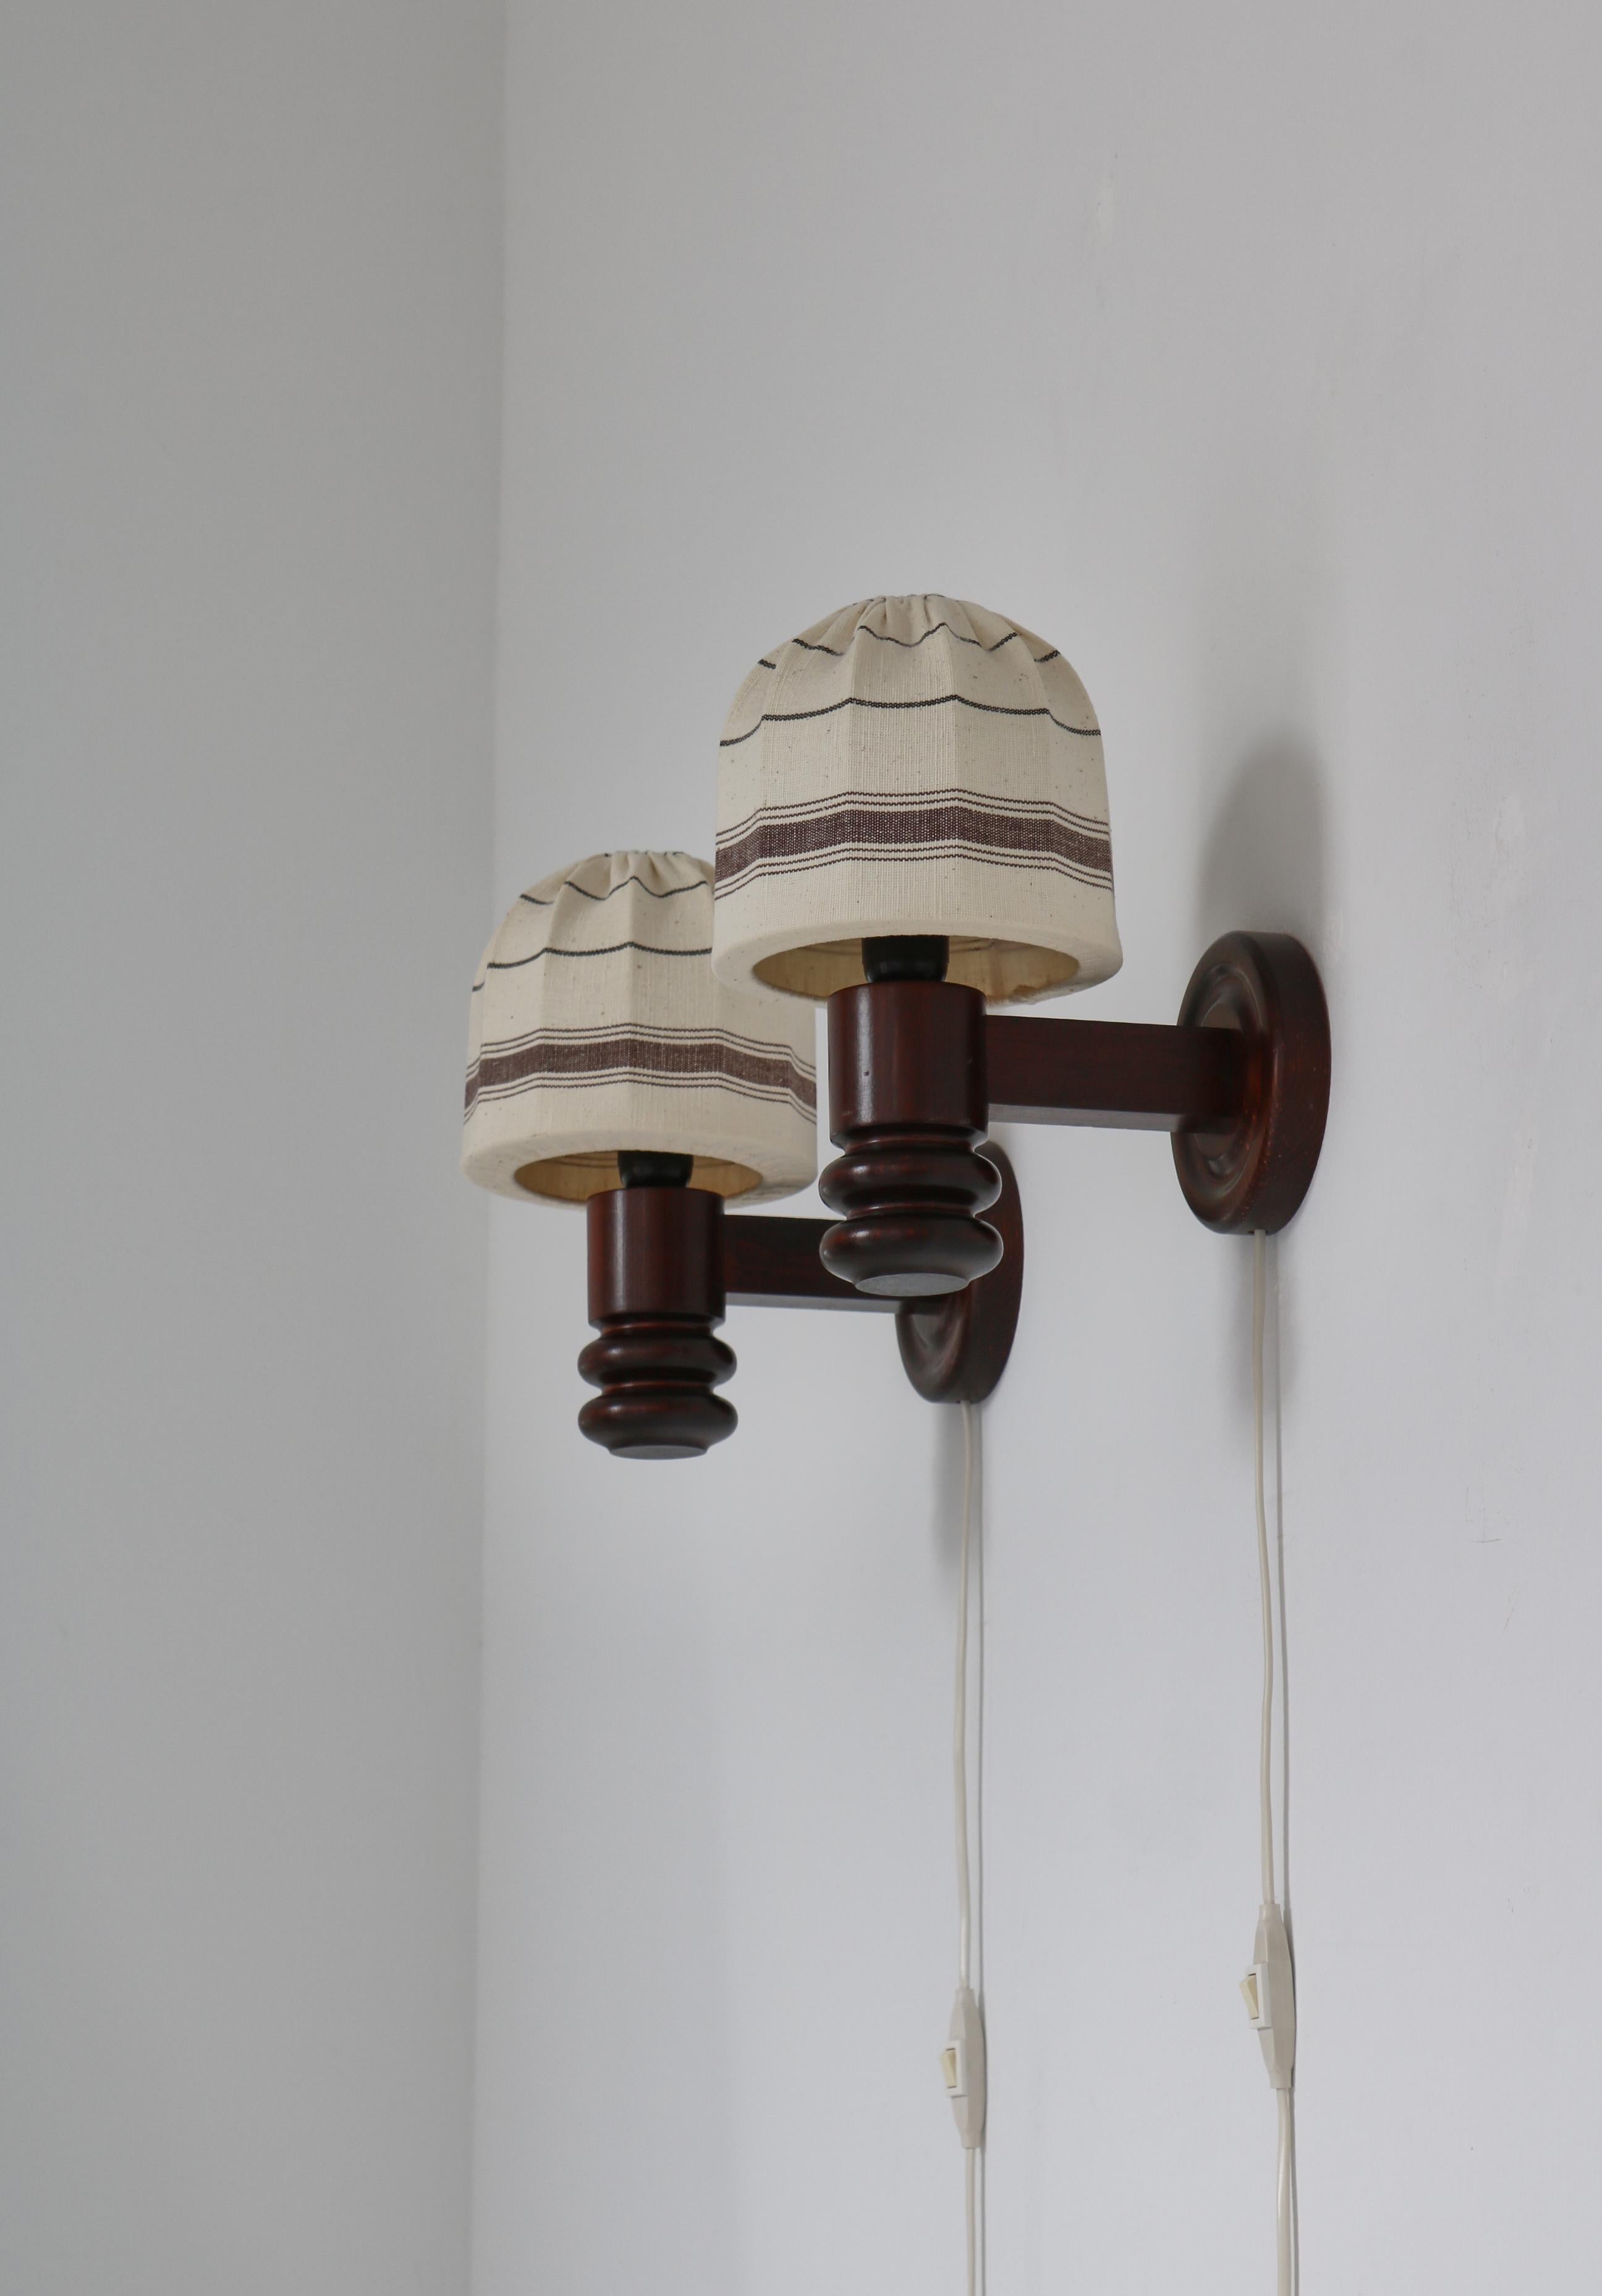 A pair of charming  vintage wall lights designed and produced by Solbackens Svarveri, Sweden in the 1970s. The wall mounts are made from dark stained Scandinavian pinewood and the original shades are handmade textile. The fixtures are in very good